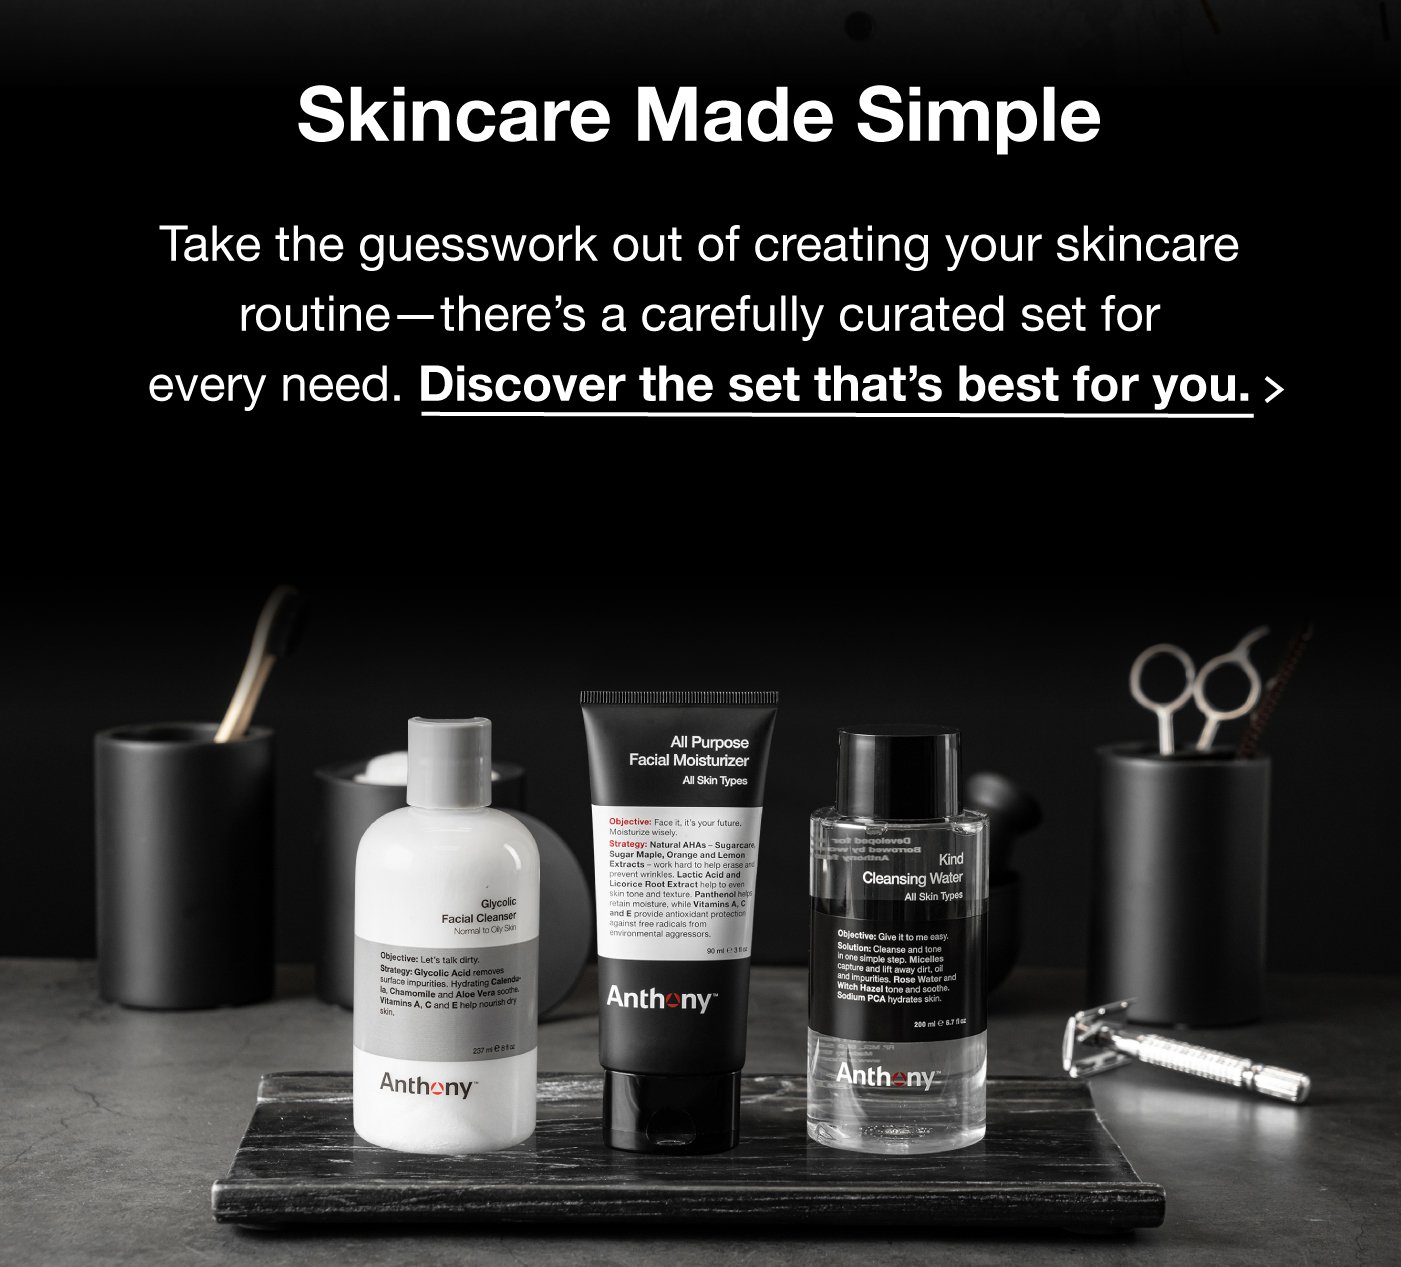 Skincare Made Simple- Take the guesswork out of creating your skincare rooutine